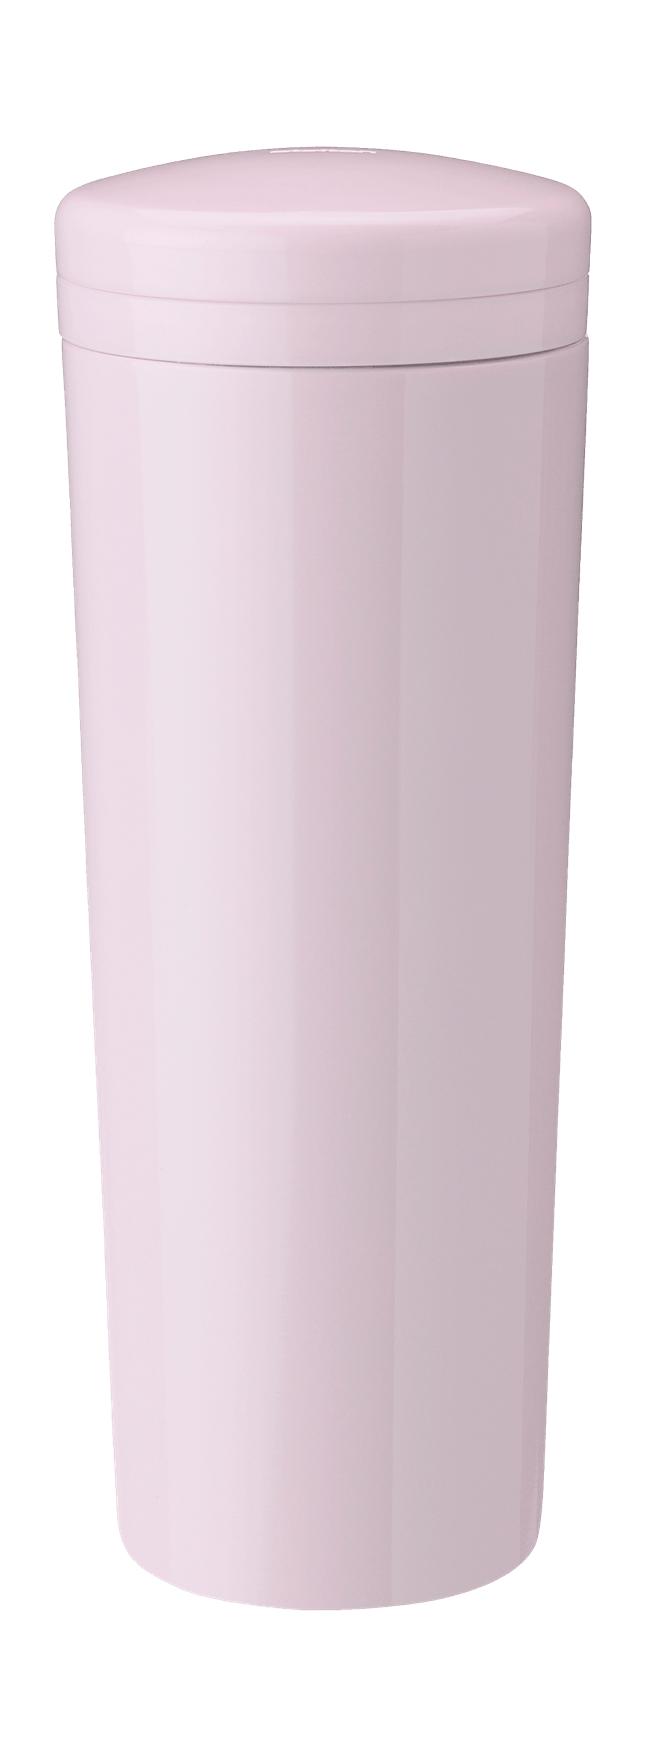 Stelton Carrie Thermos -pullo 0,5 L, ruusu